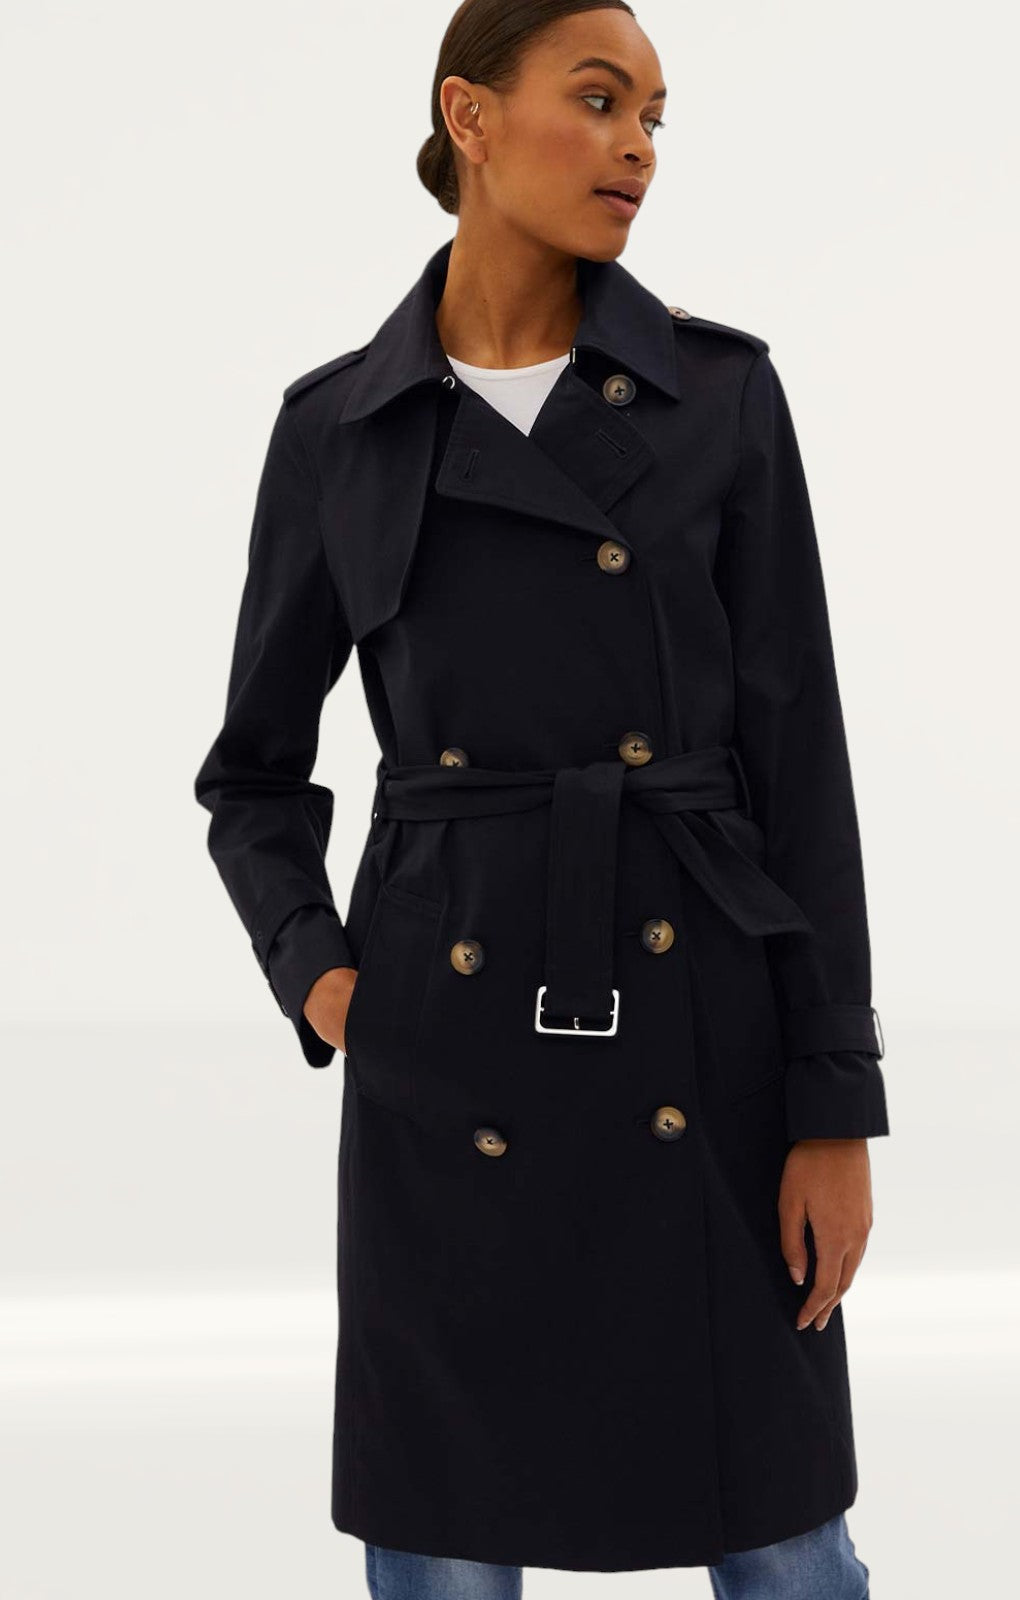 M&S Black Essential Trench